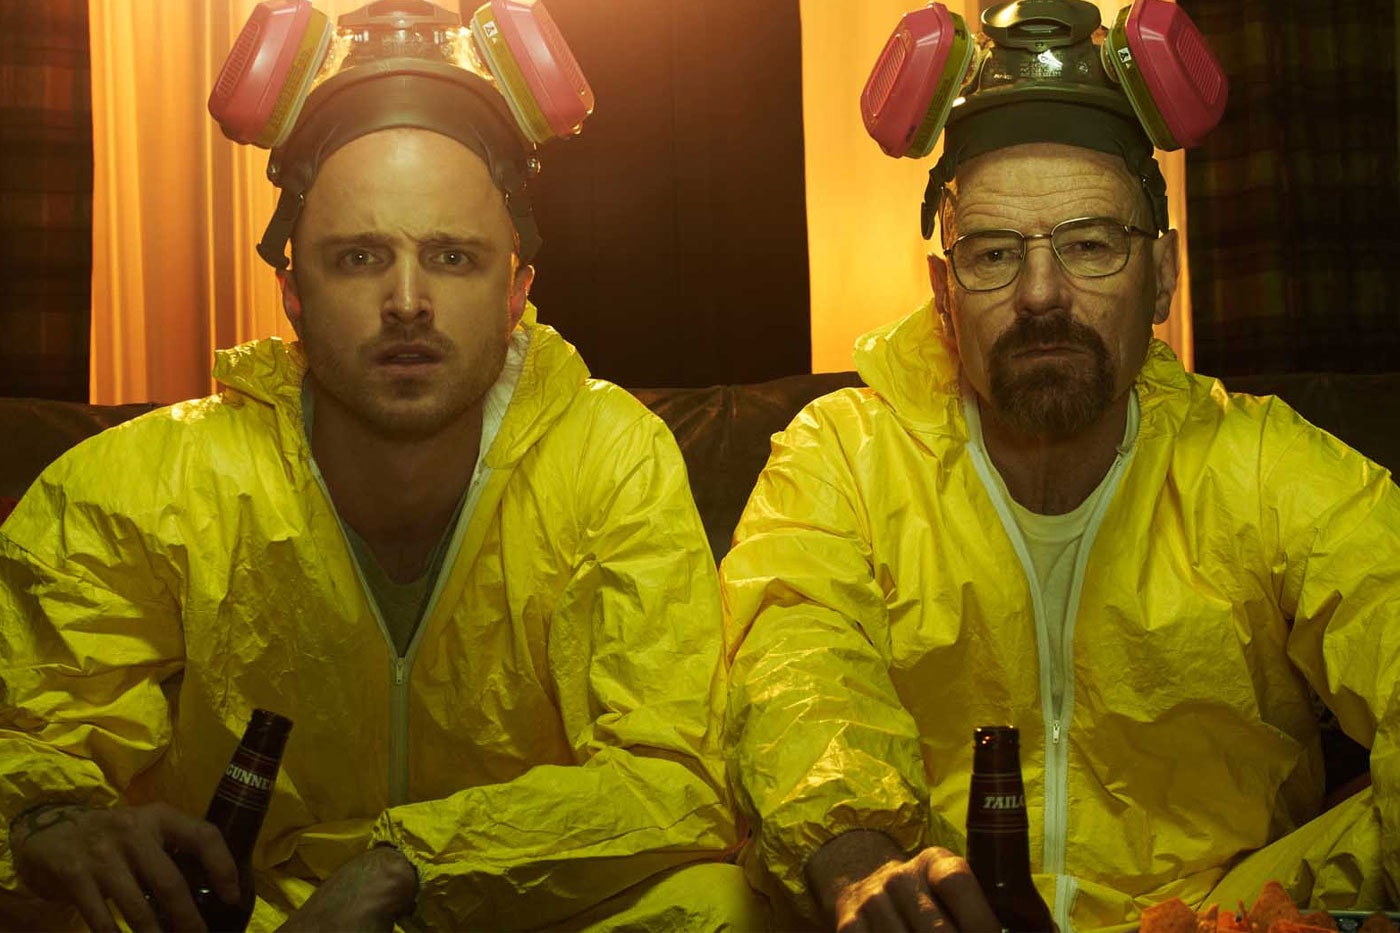 Breaking Bad Could Leave Netflix 2025 sony television license expiry amc jesse pinkman walter white bryan cranston aaron paul